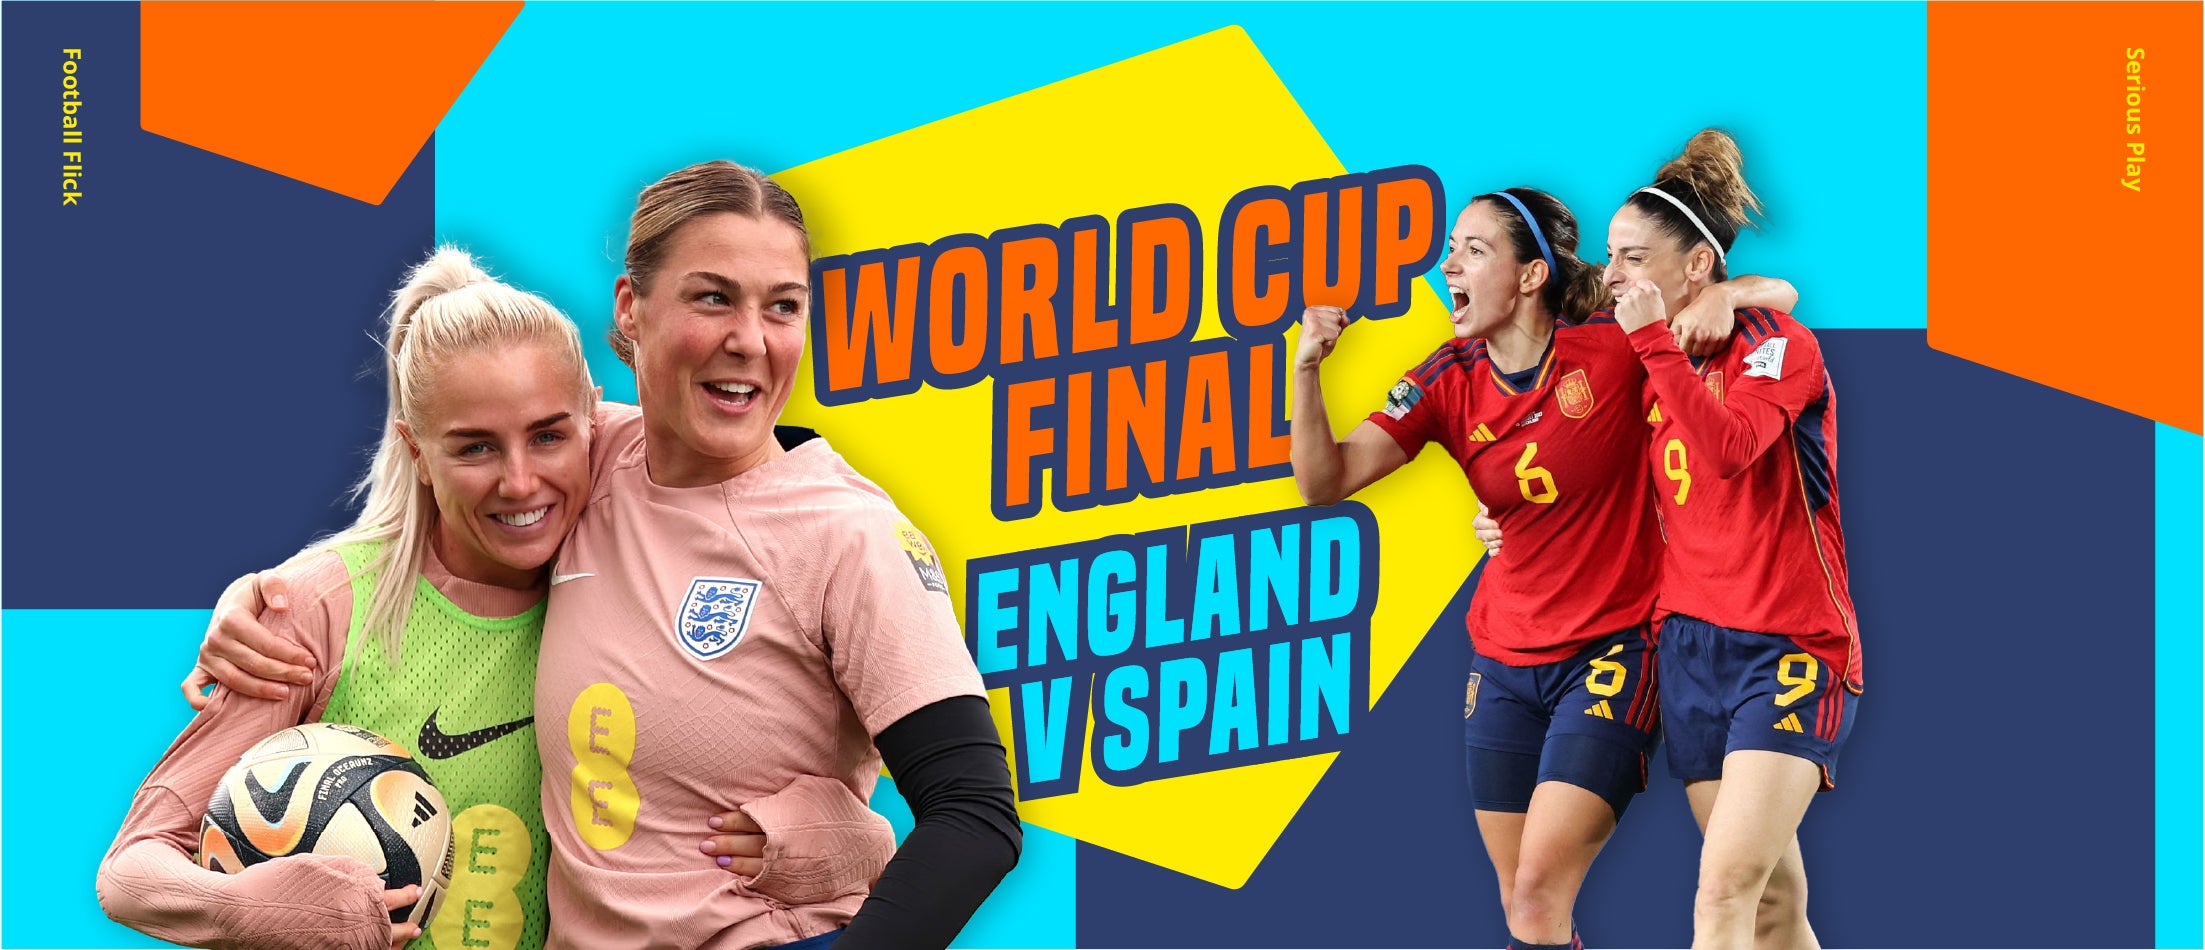 WWC World Cup Final Preview England V Spain